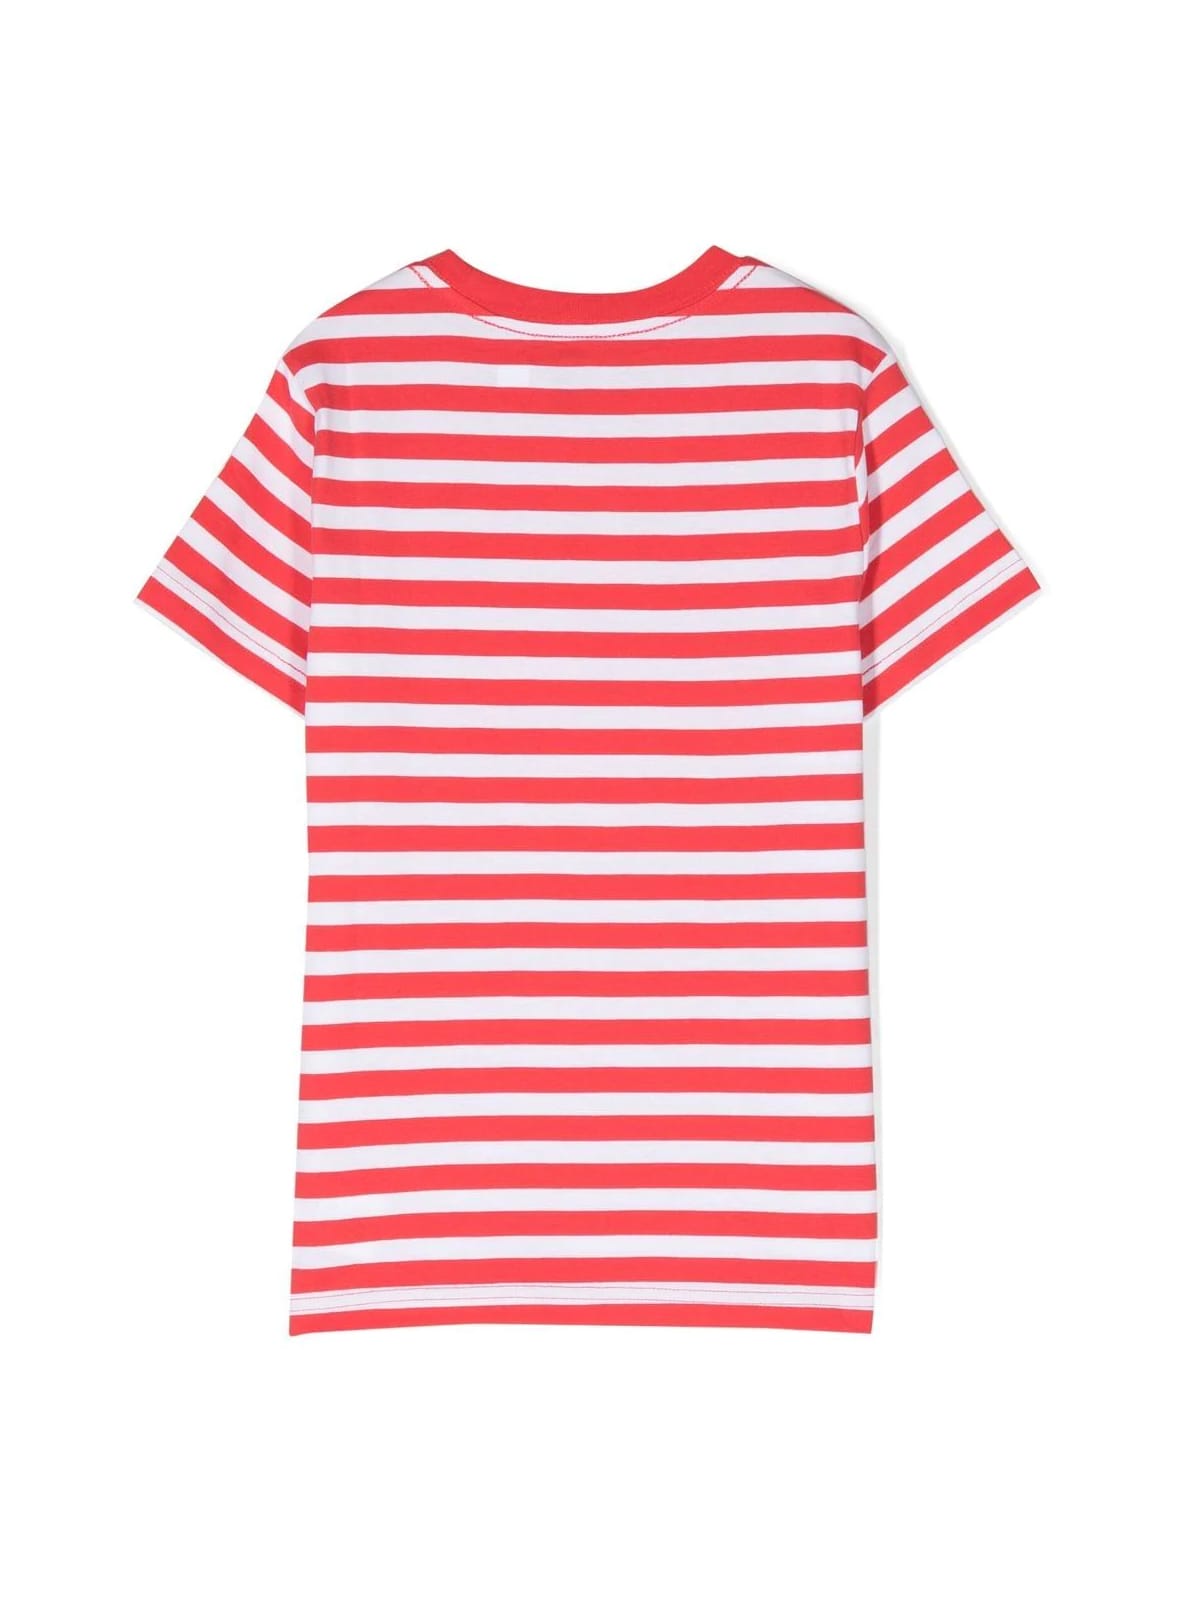 Shop Polo Ralph Lauren Ssydcn M1 Knit Shirts Tshirt In Red Reef White